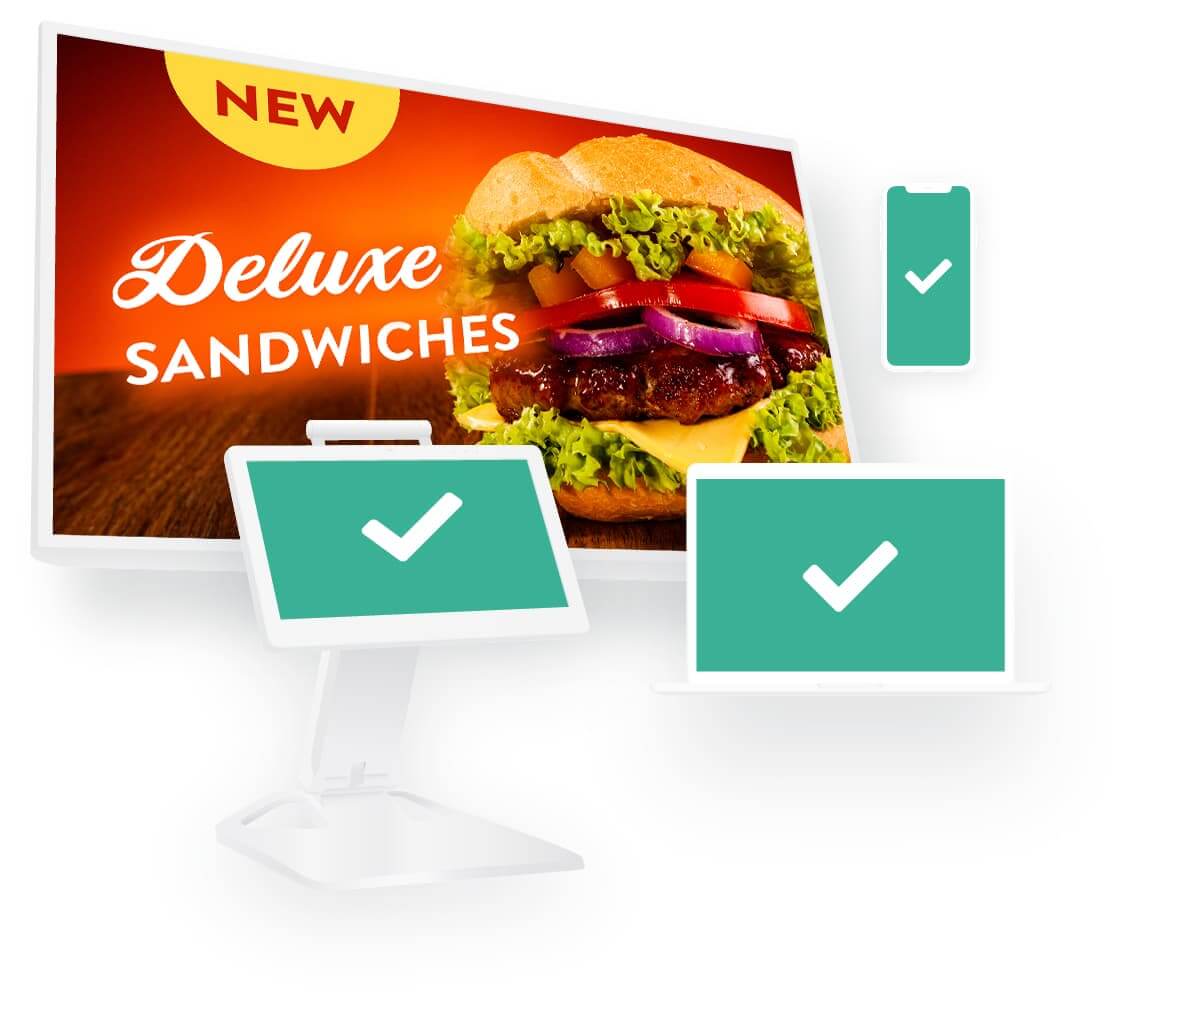 Digital display menu syncing with the point of sale system, school website, and online ordering app